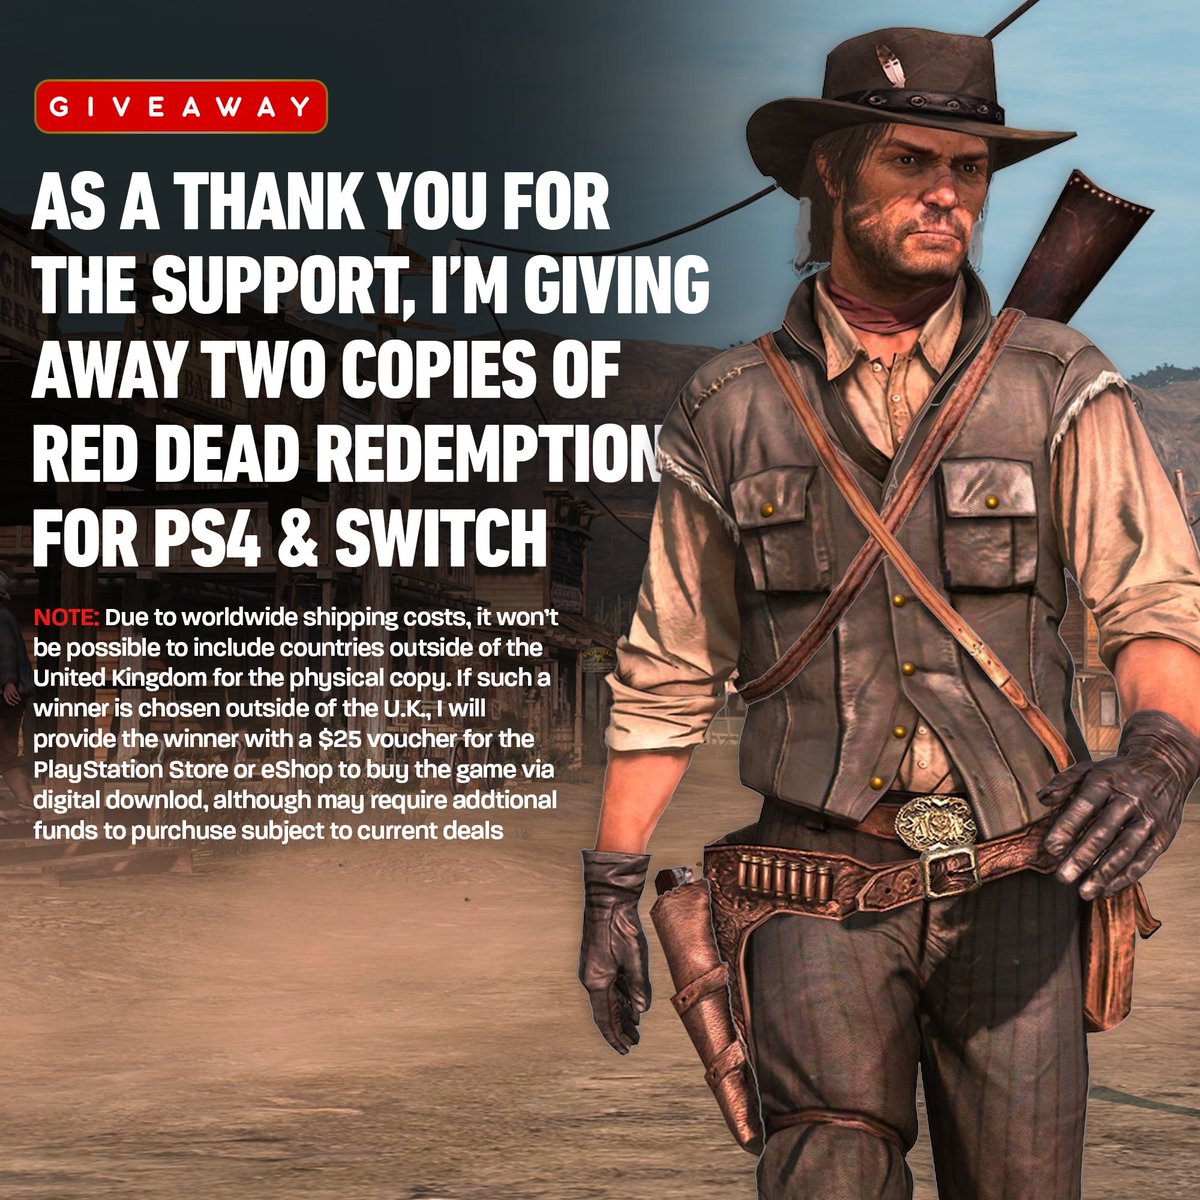 As a thank you gesture, I'm pleased to announce a giveaway for two physical copies of Red Dead Redemption's conversion port for PS4/PS5 and Nintendo Switch funded by Twitter's ad revenue sharing program. To enter, simply Like and RT. Winner is to be picked on Friday, April 18.